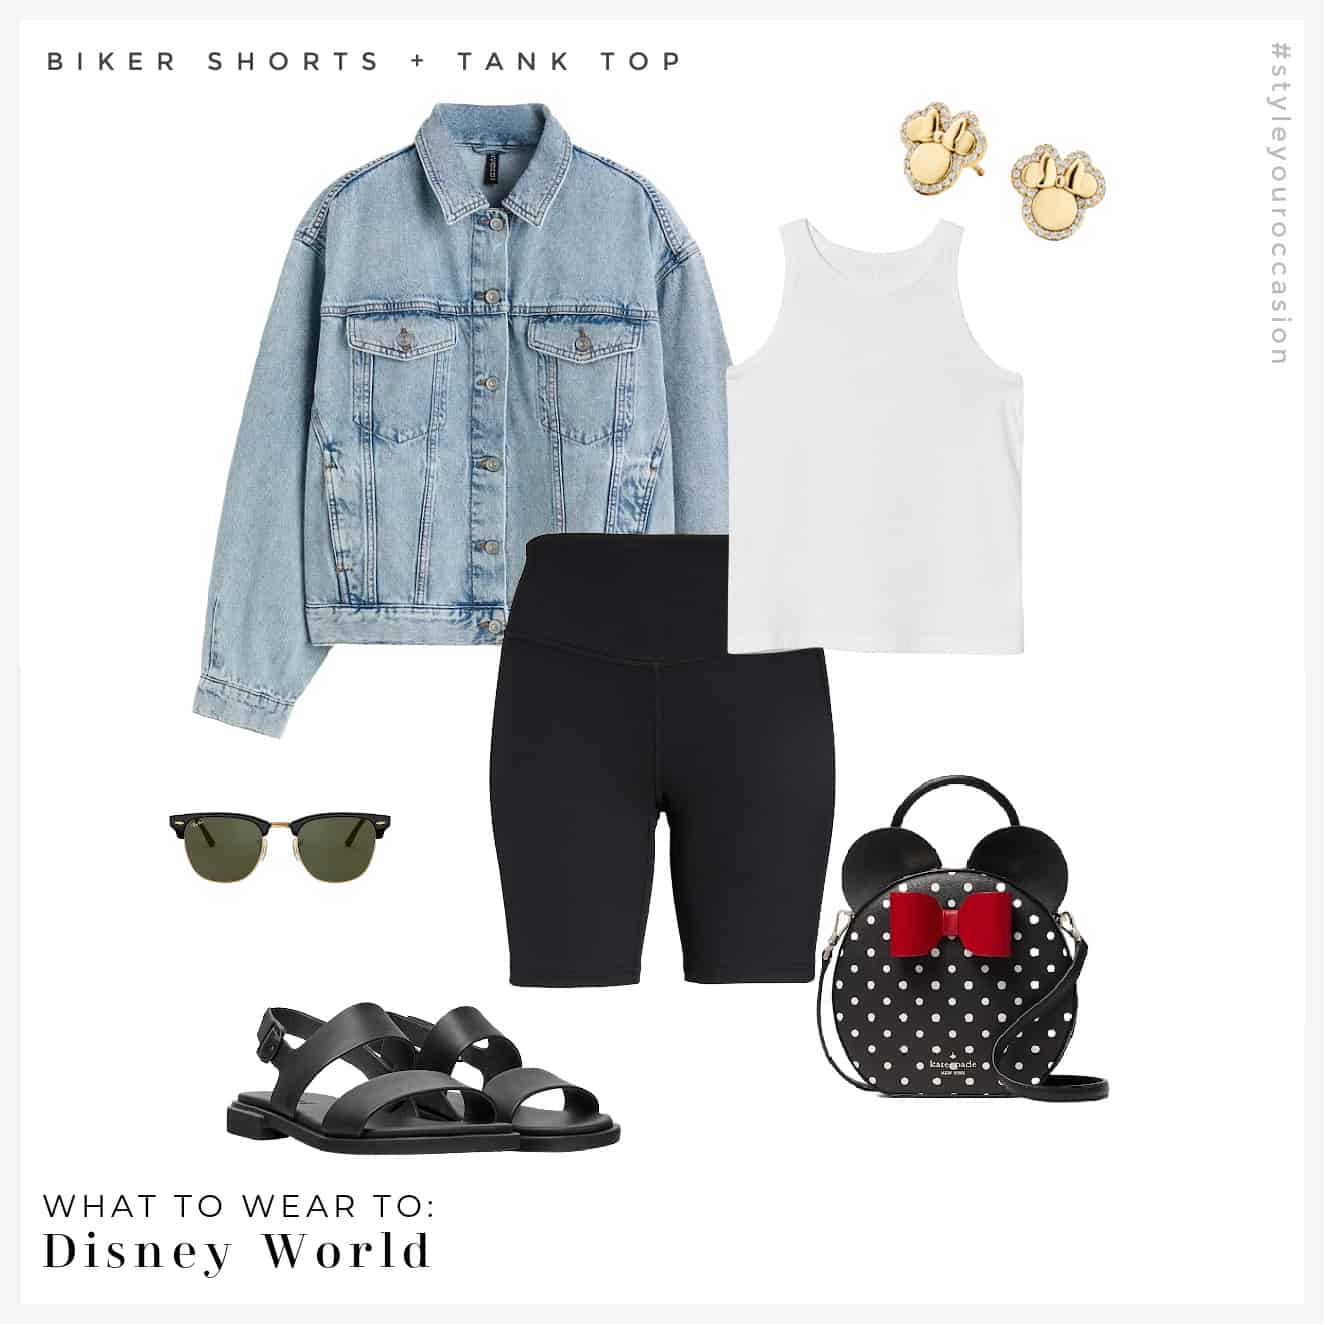 image of an outfit for Disney World with black biker shorts, a white tank top, a denim jacket, a Kate Spade Minnie purse, Minnie Mouse earrings, and black sandals